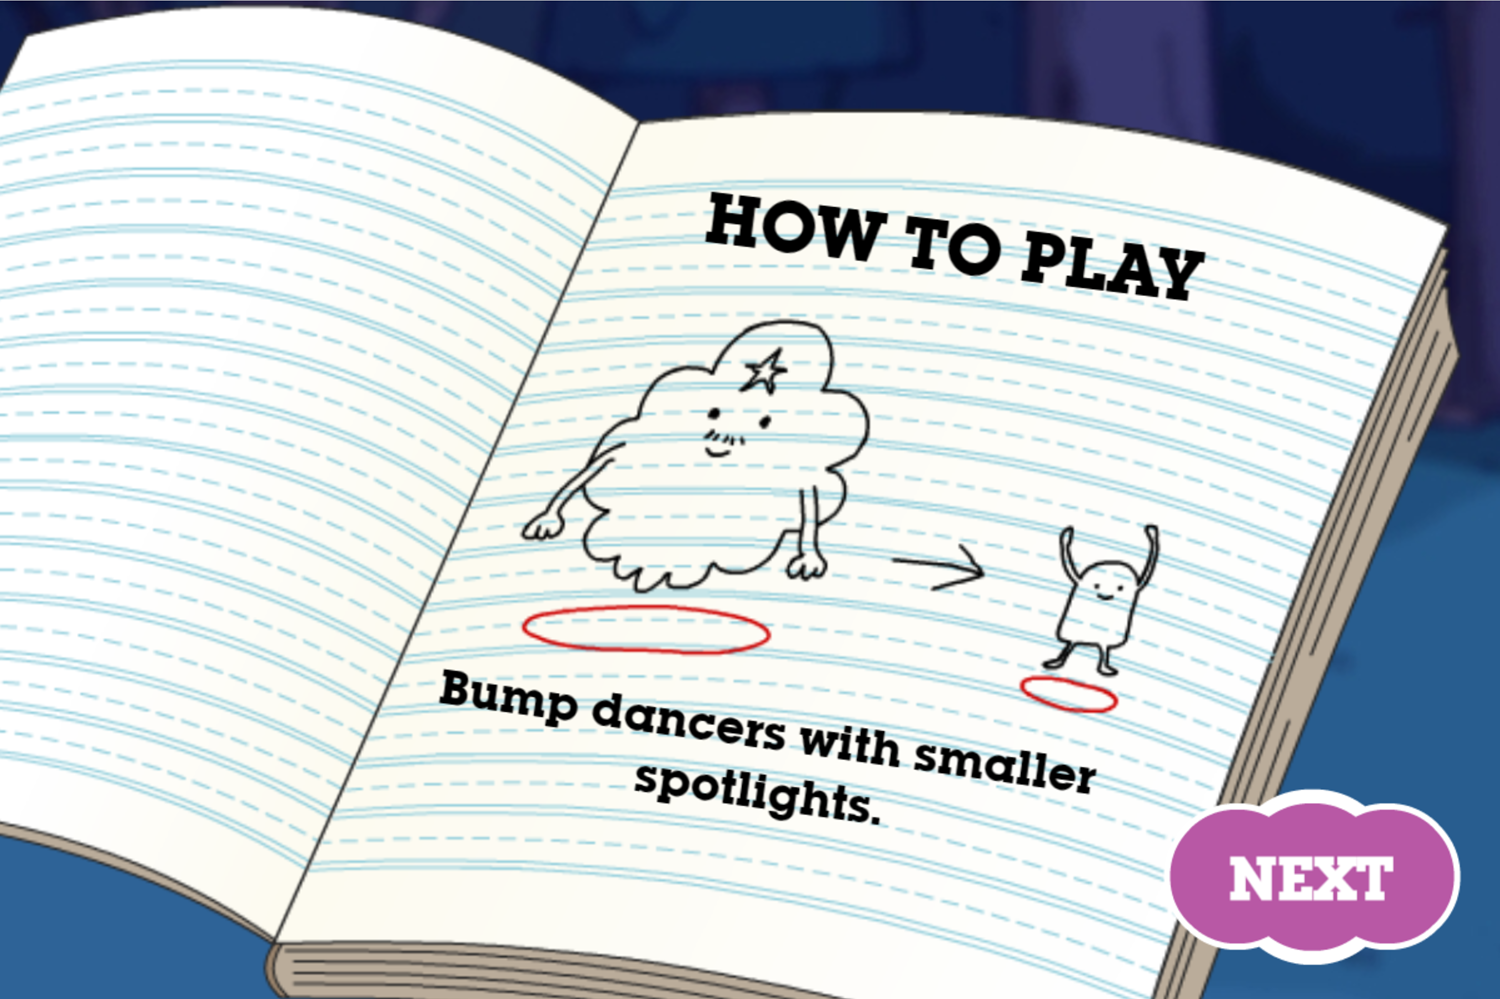 Adventure Time These Lumps How to Play Screenshot.